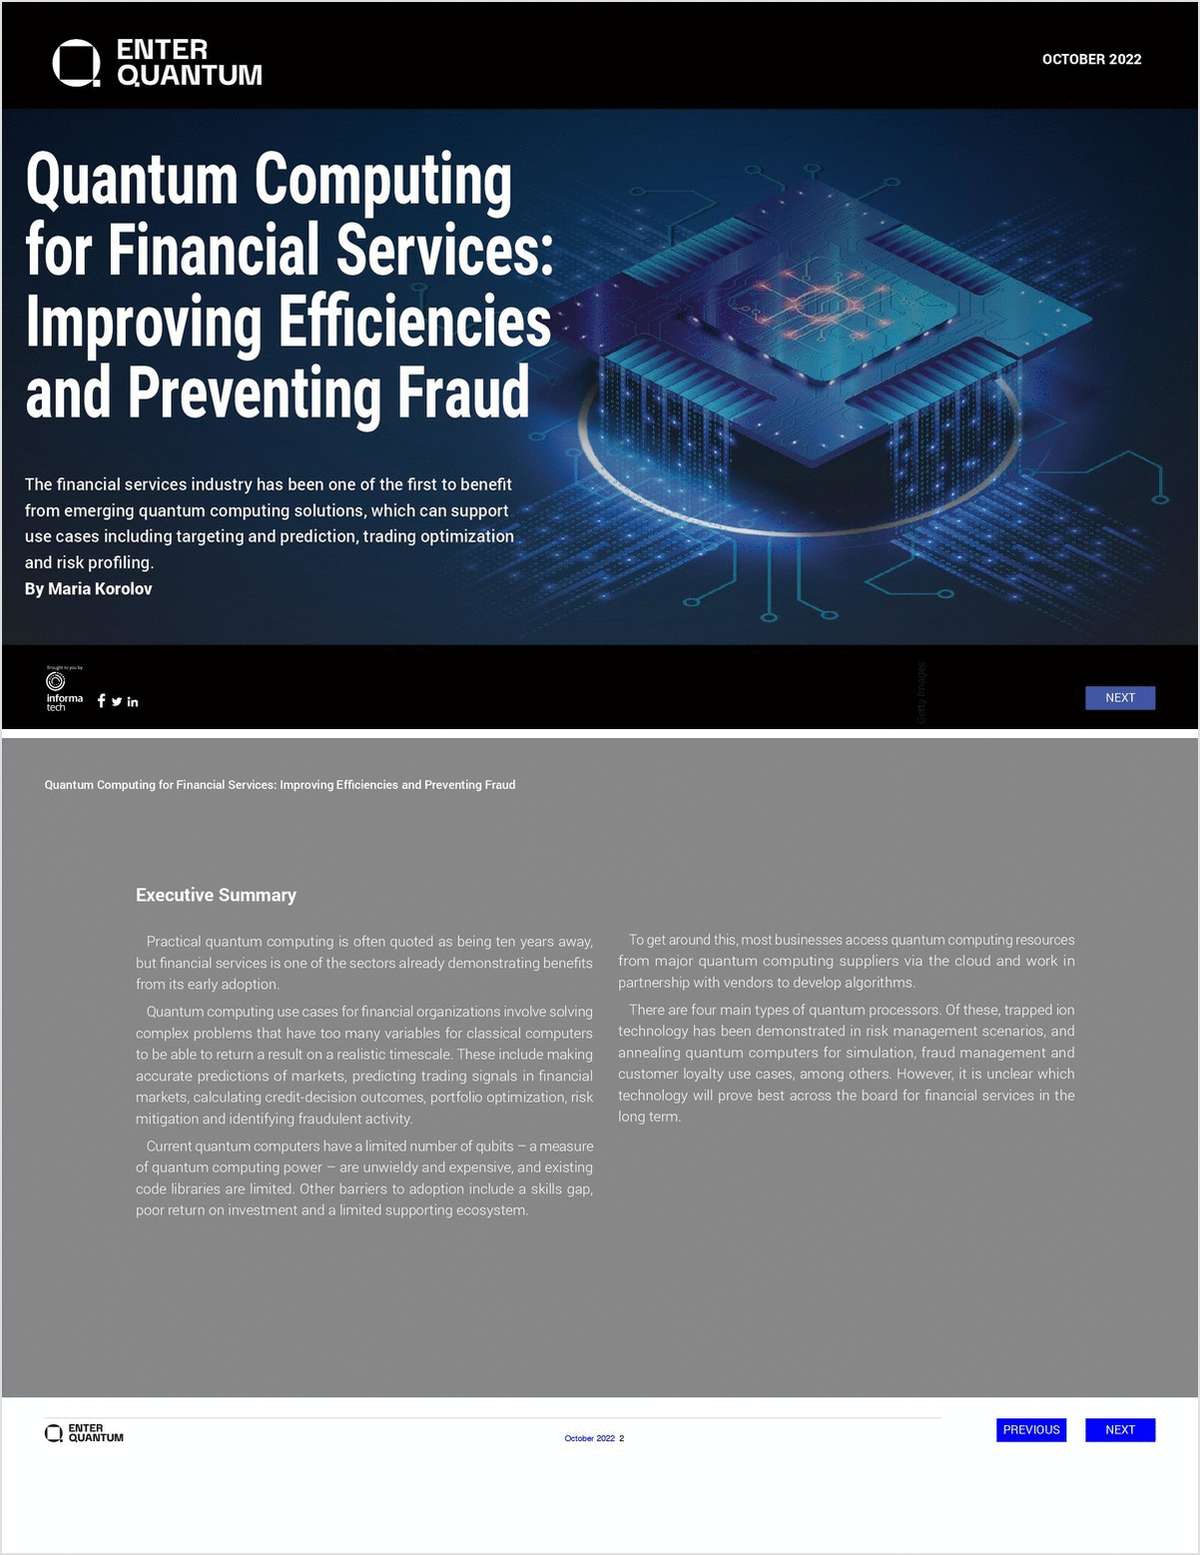 Quantum Computing for Financial Services: Improving Efficiencies and Preventing Fraud